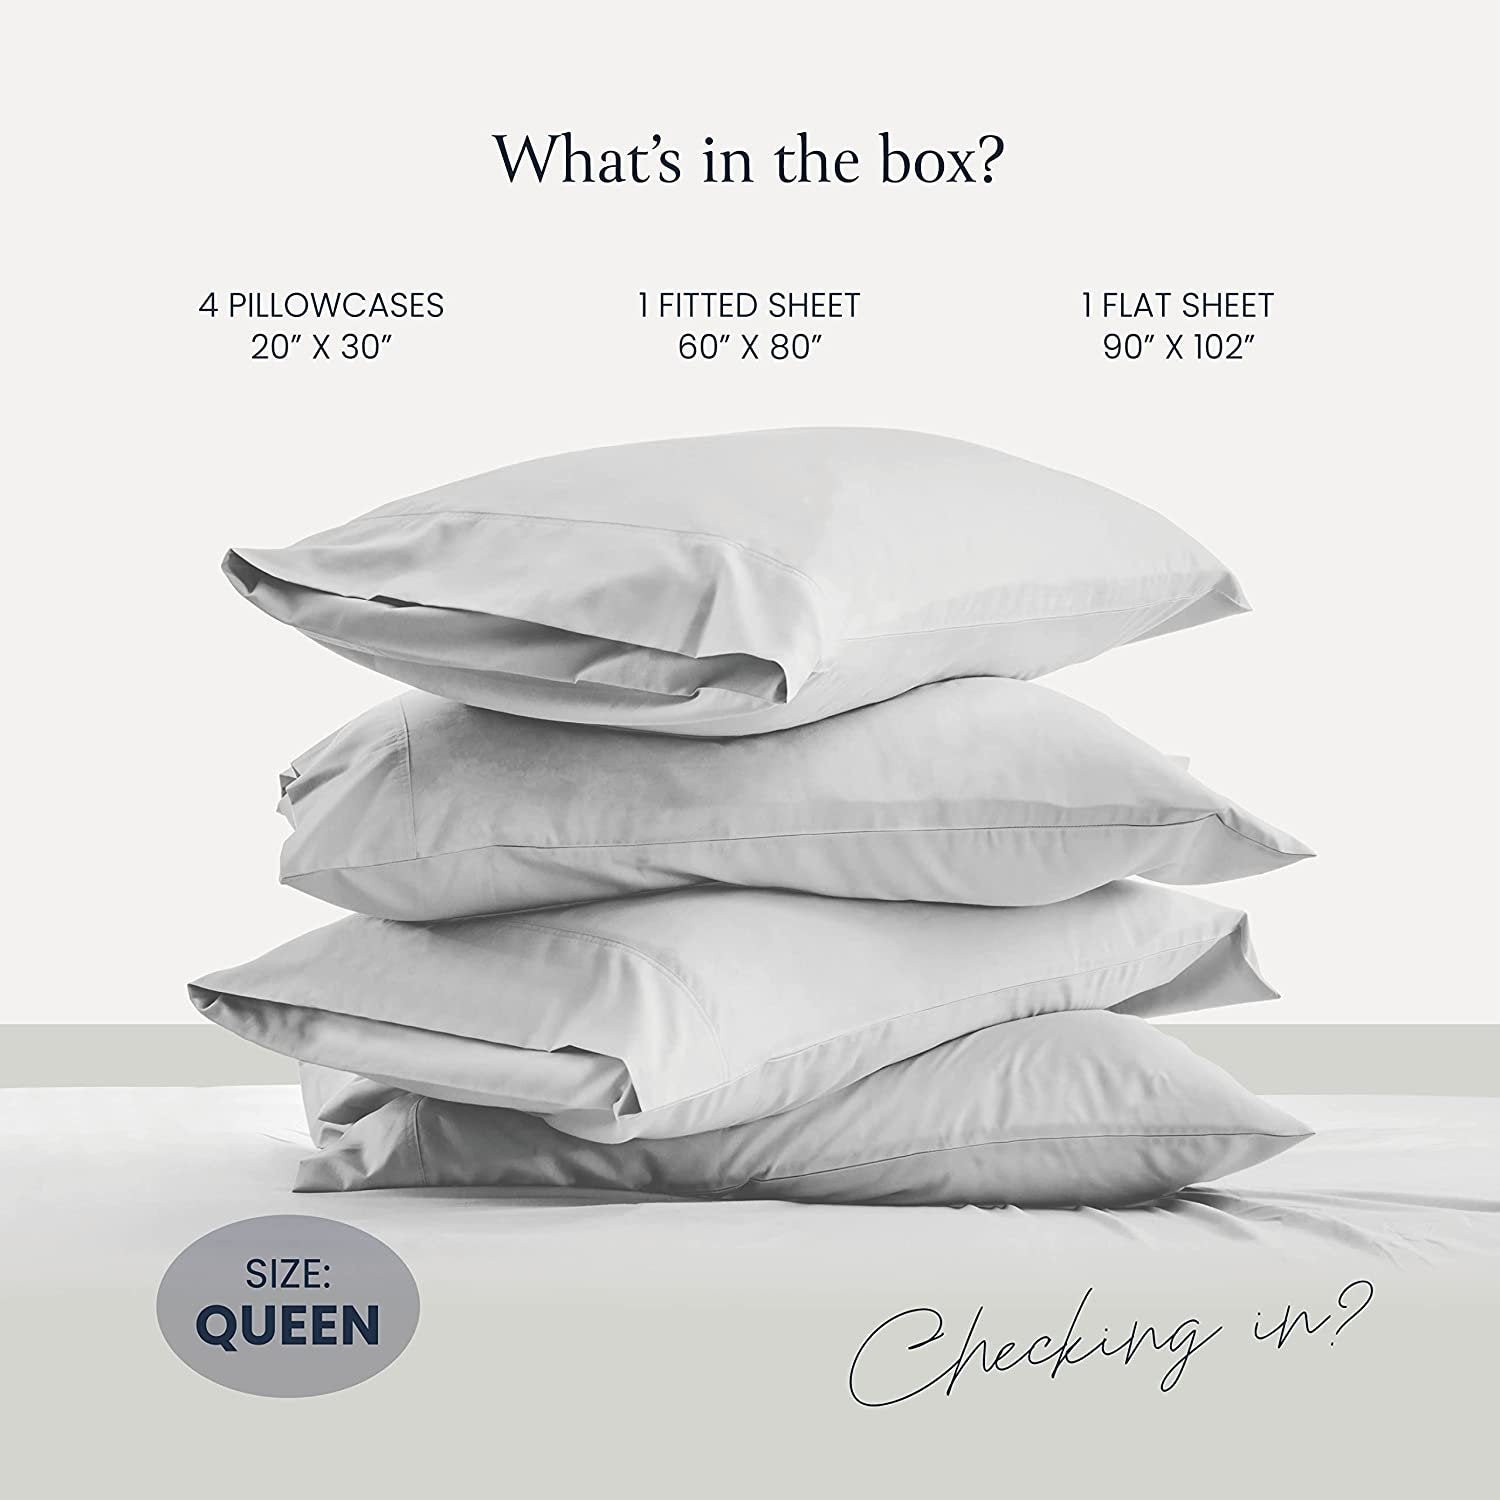 BELADOR Silky Soft King Sheet Set - Luxury 4 Piece Bed Sheets for King Size Bed, Secure-Fit Deep Pocket Sheets with Elastic, Breathable Hotel Sheets and Pillowcase Set, Wrinkle Free Oeko-Tex Sheets